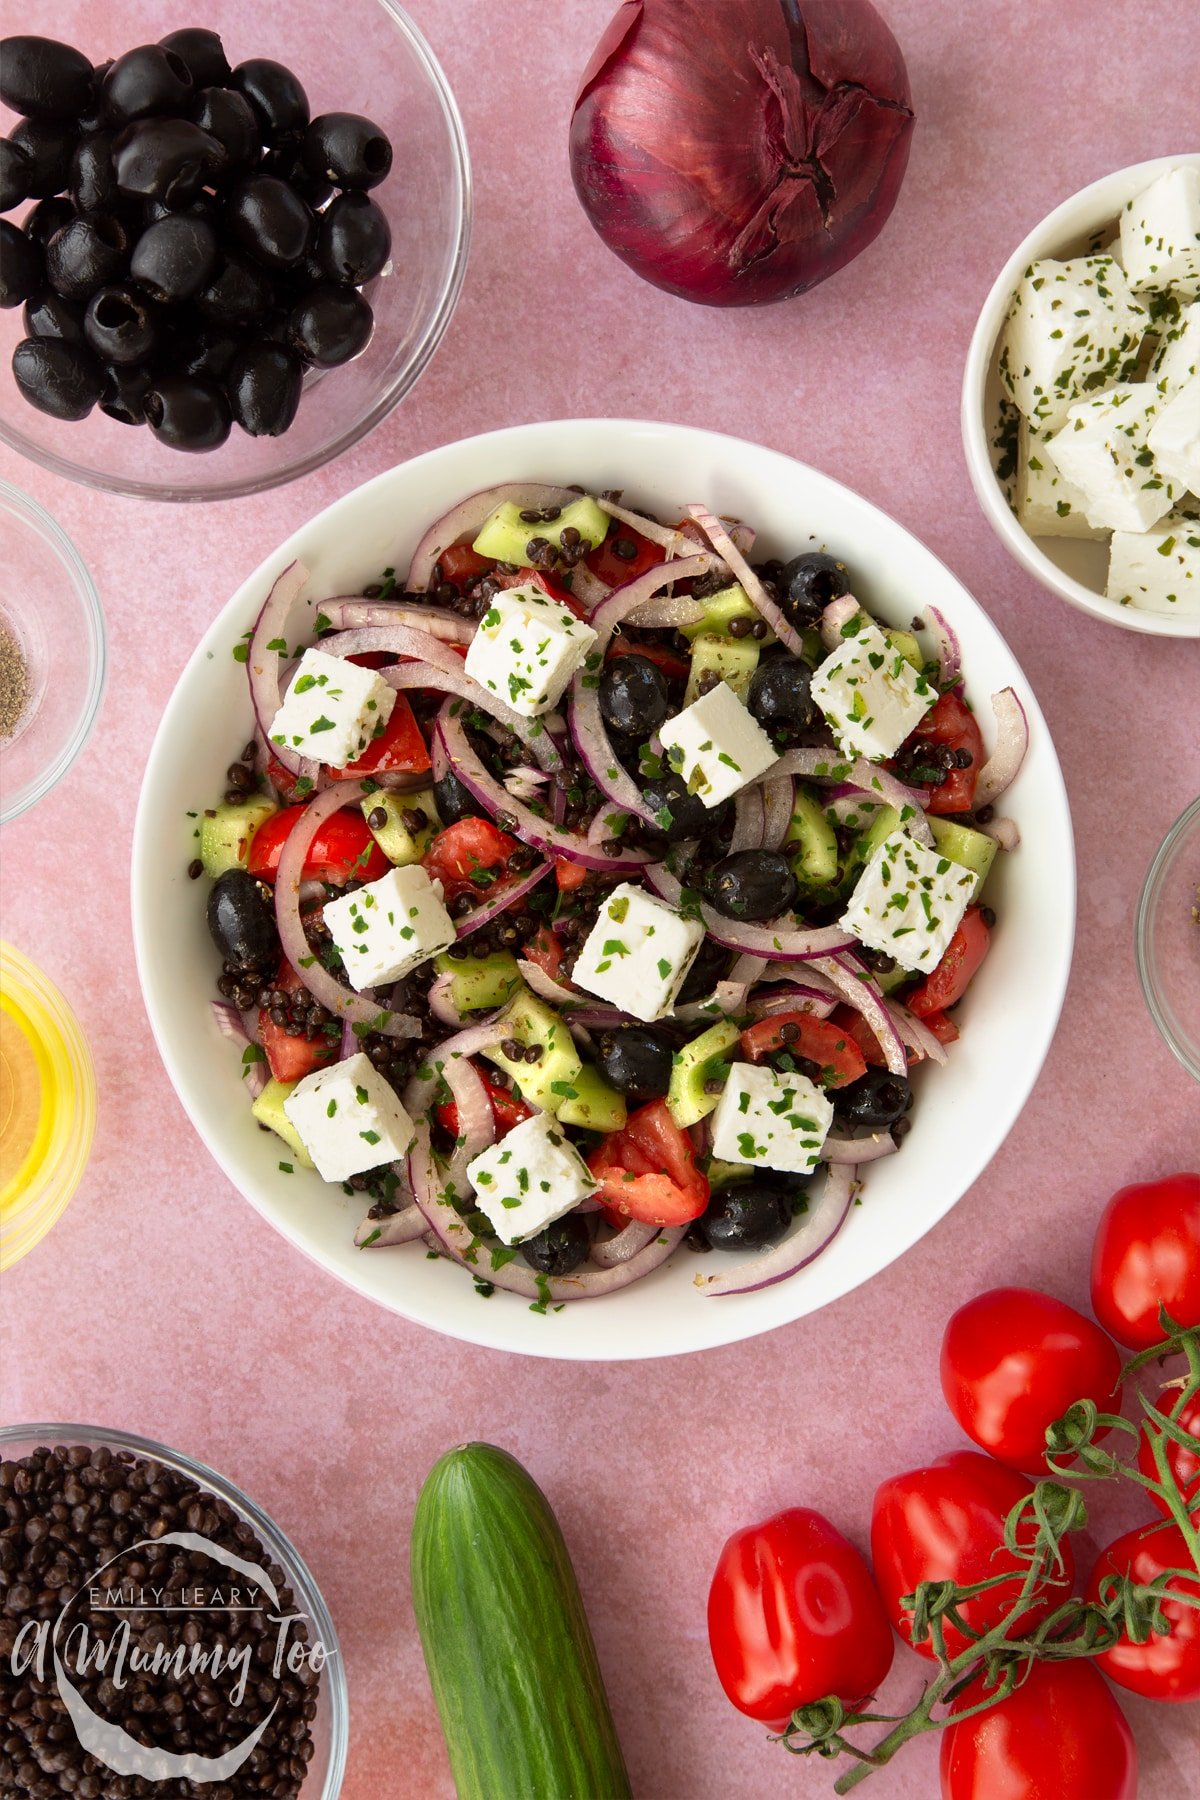 Greek lentil salad in a white serving bowl. Ingredients to make the salad surround the bowl, such as tomatoes, olives, lentils and cucumber.